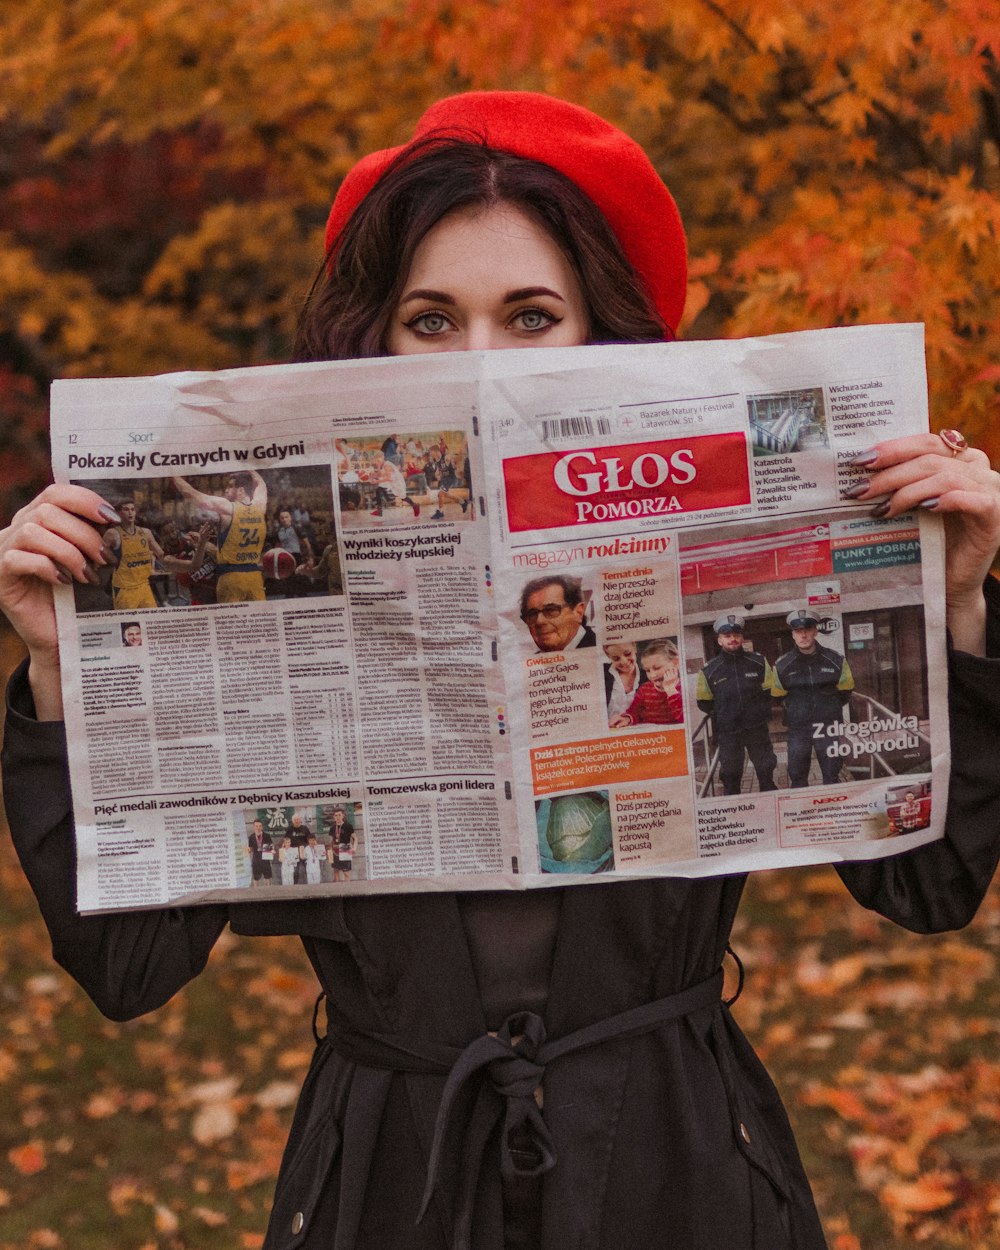 a woman in a red hat holding up a newspaper